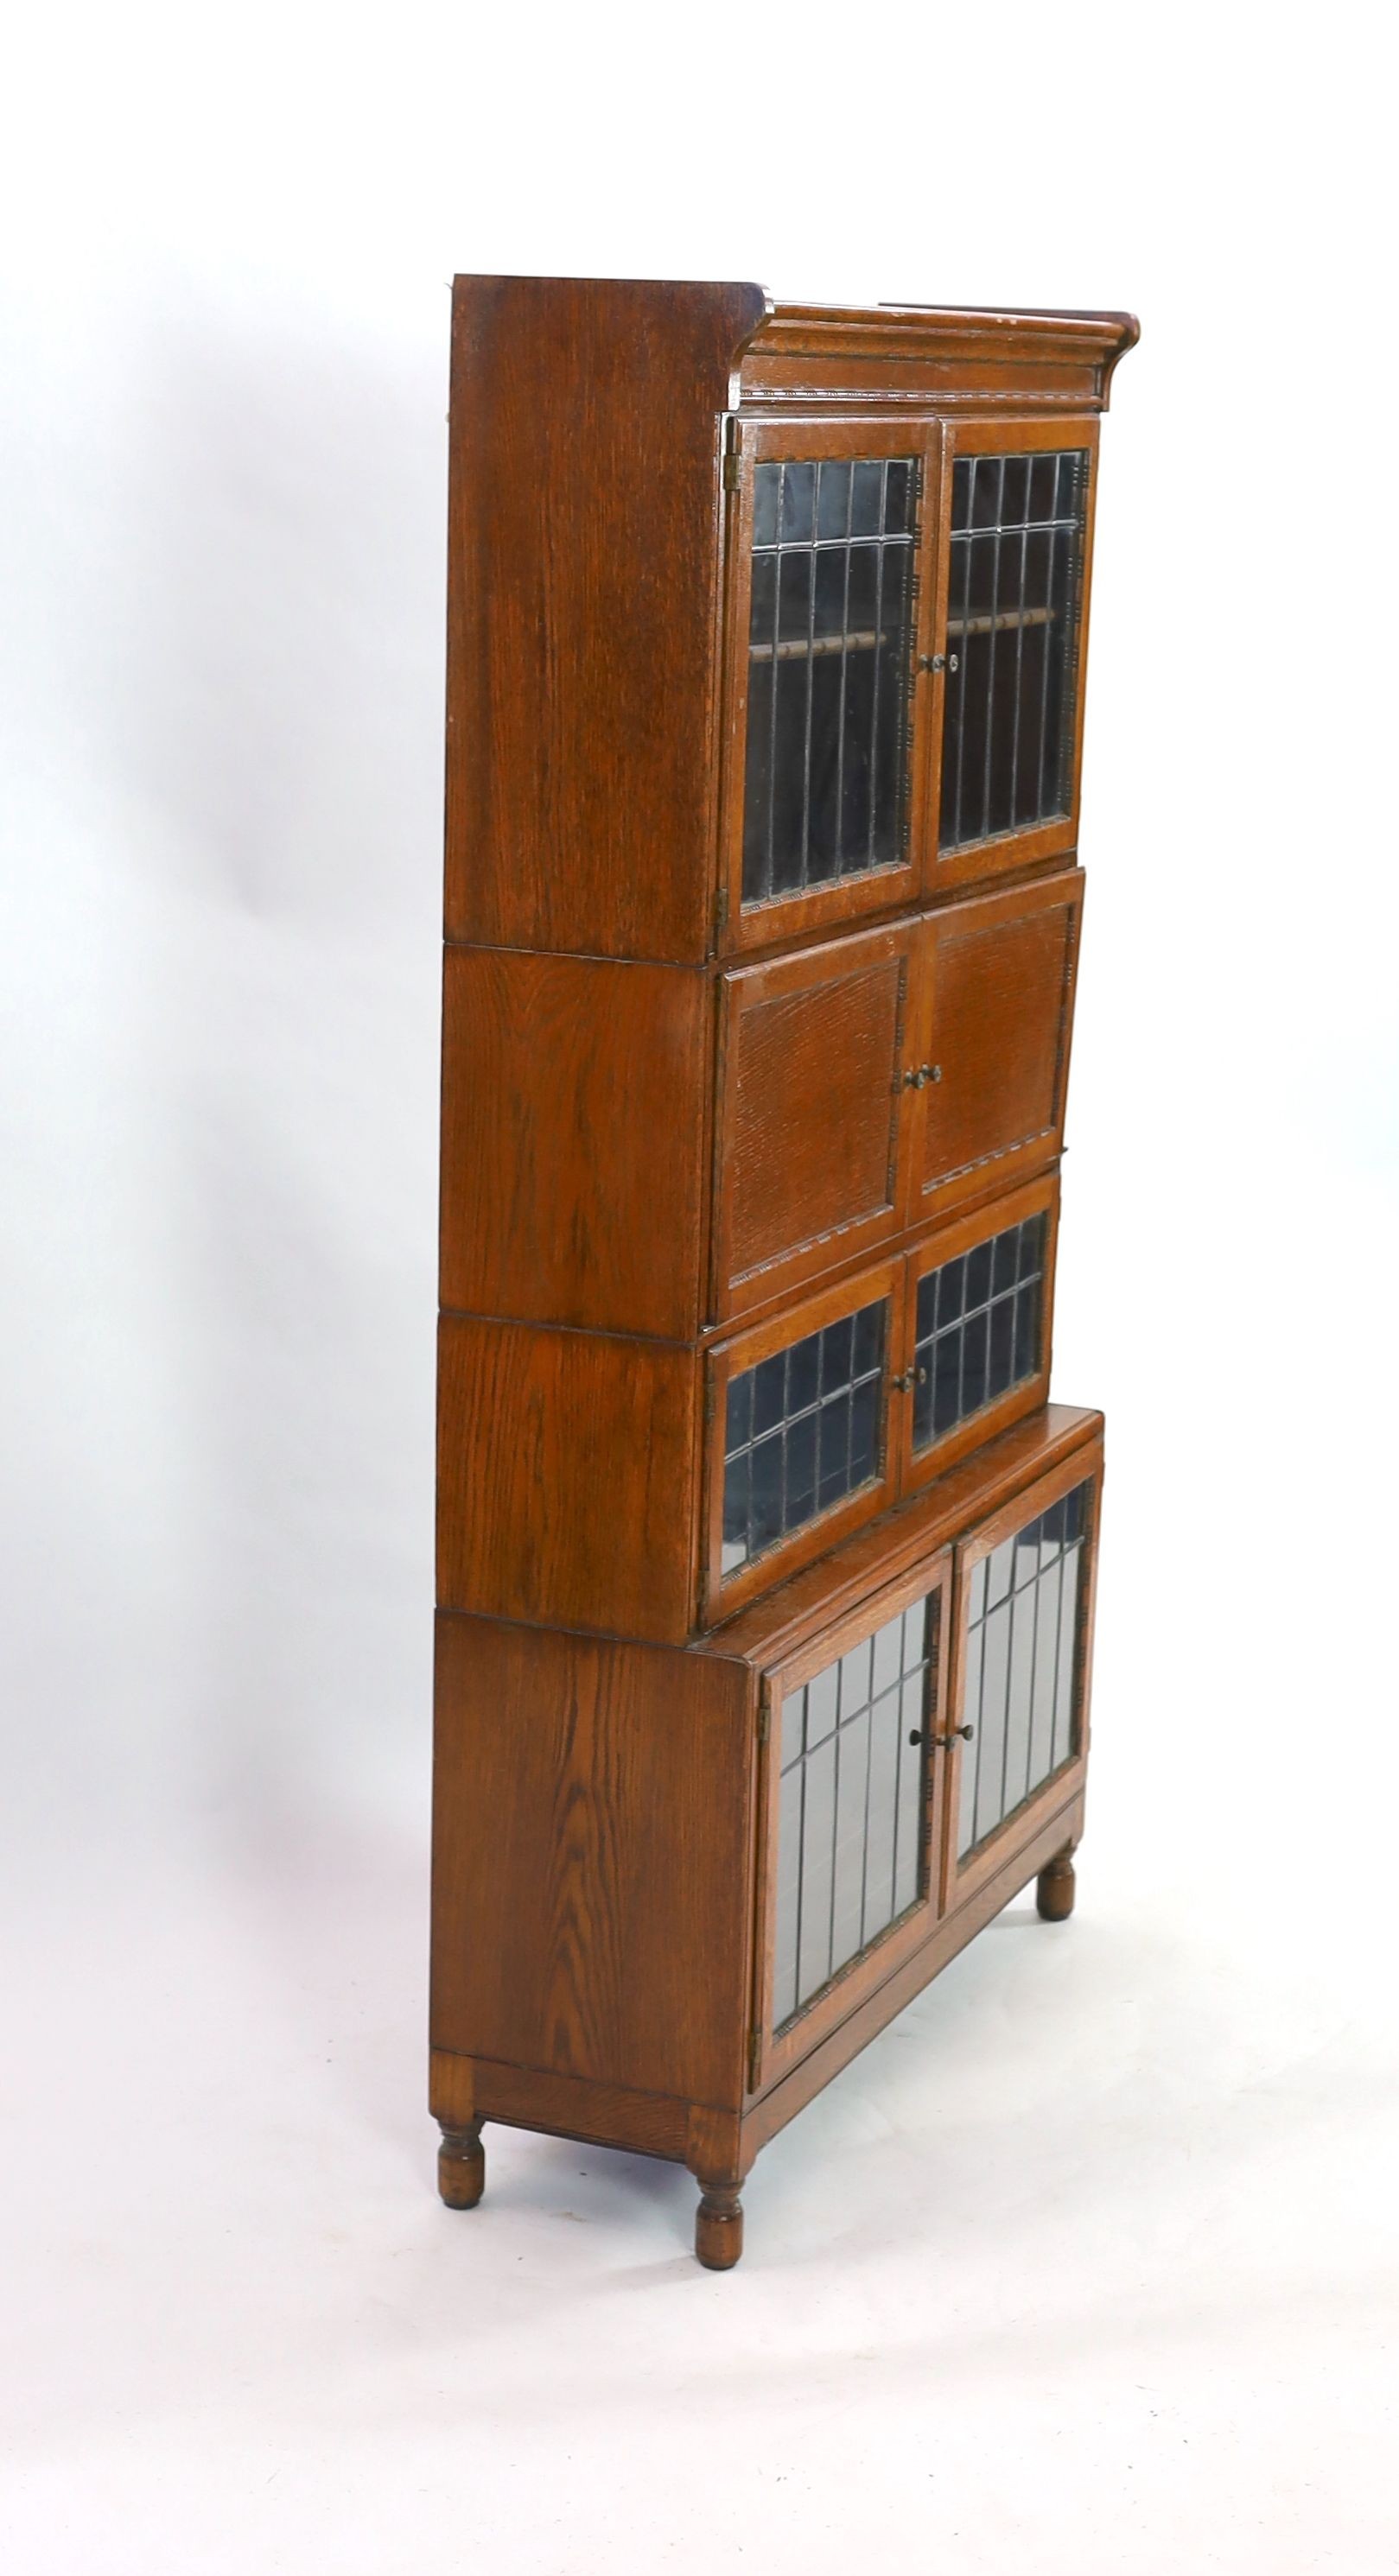 An early 20th century Globe Wernicke style four section bookcase, with leaded glazed doors, width 89cm depth 30cm height 162cm